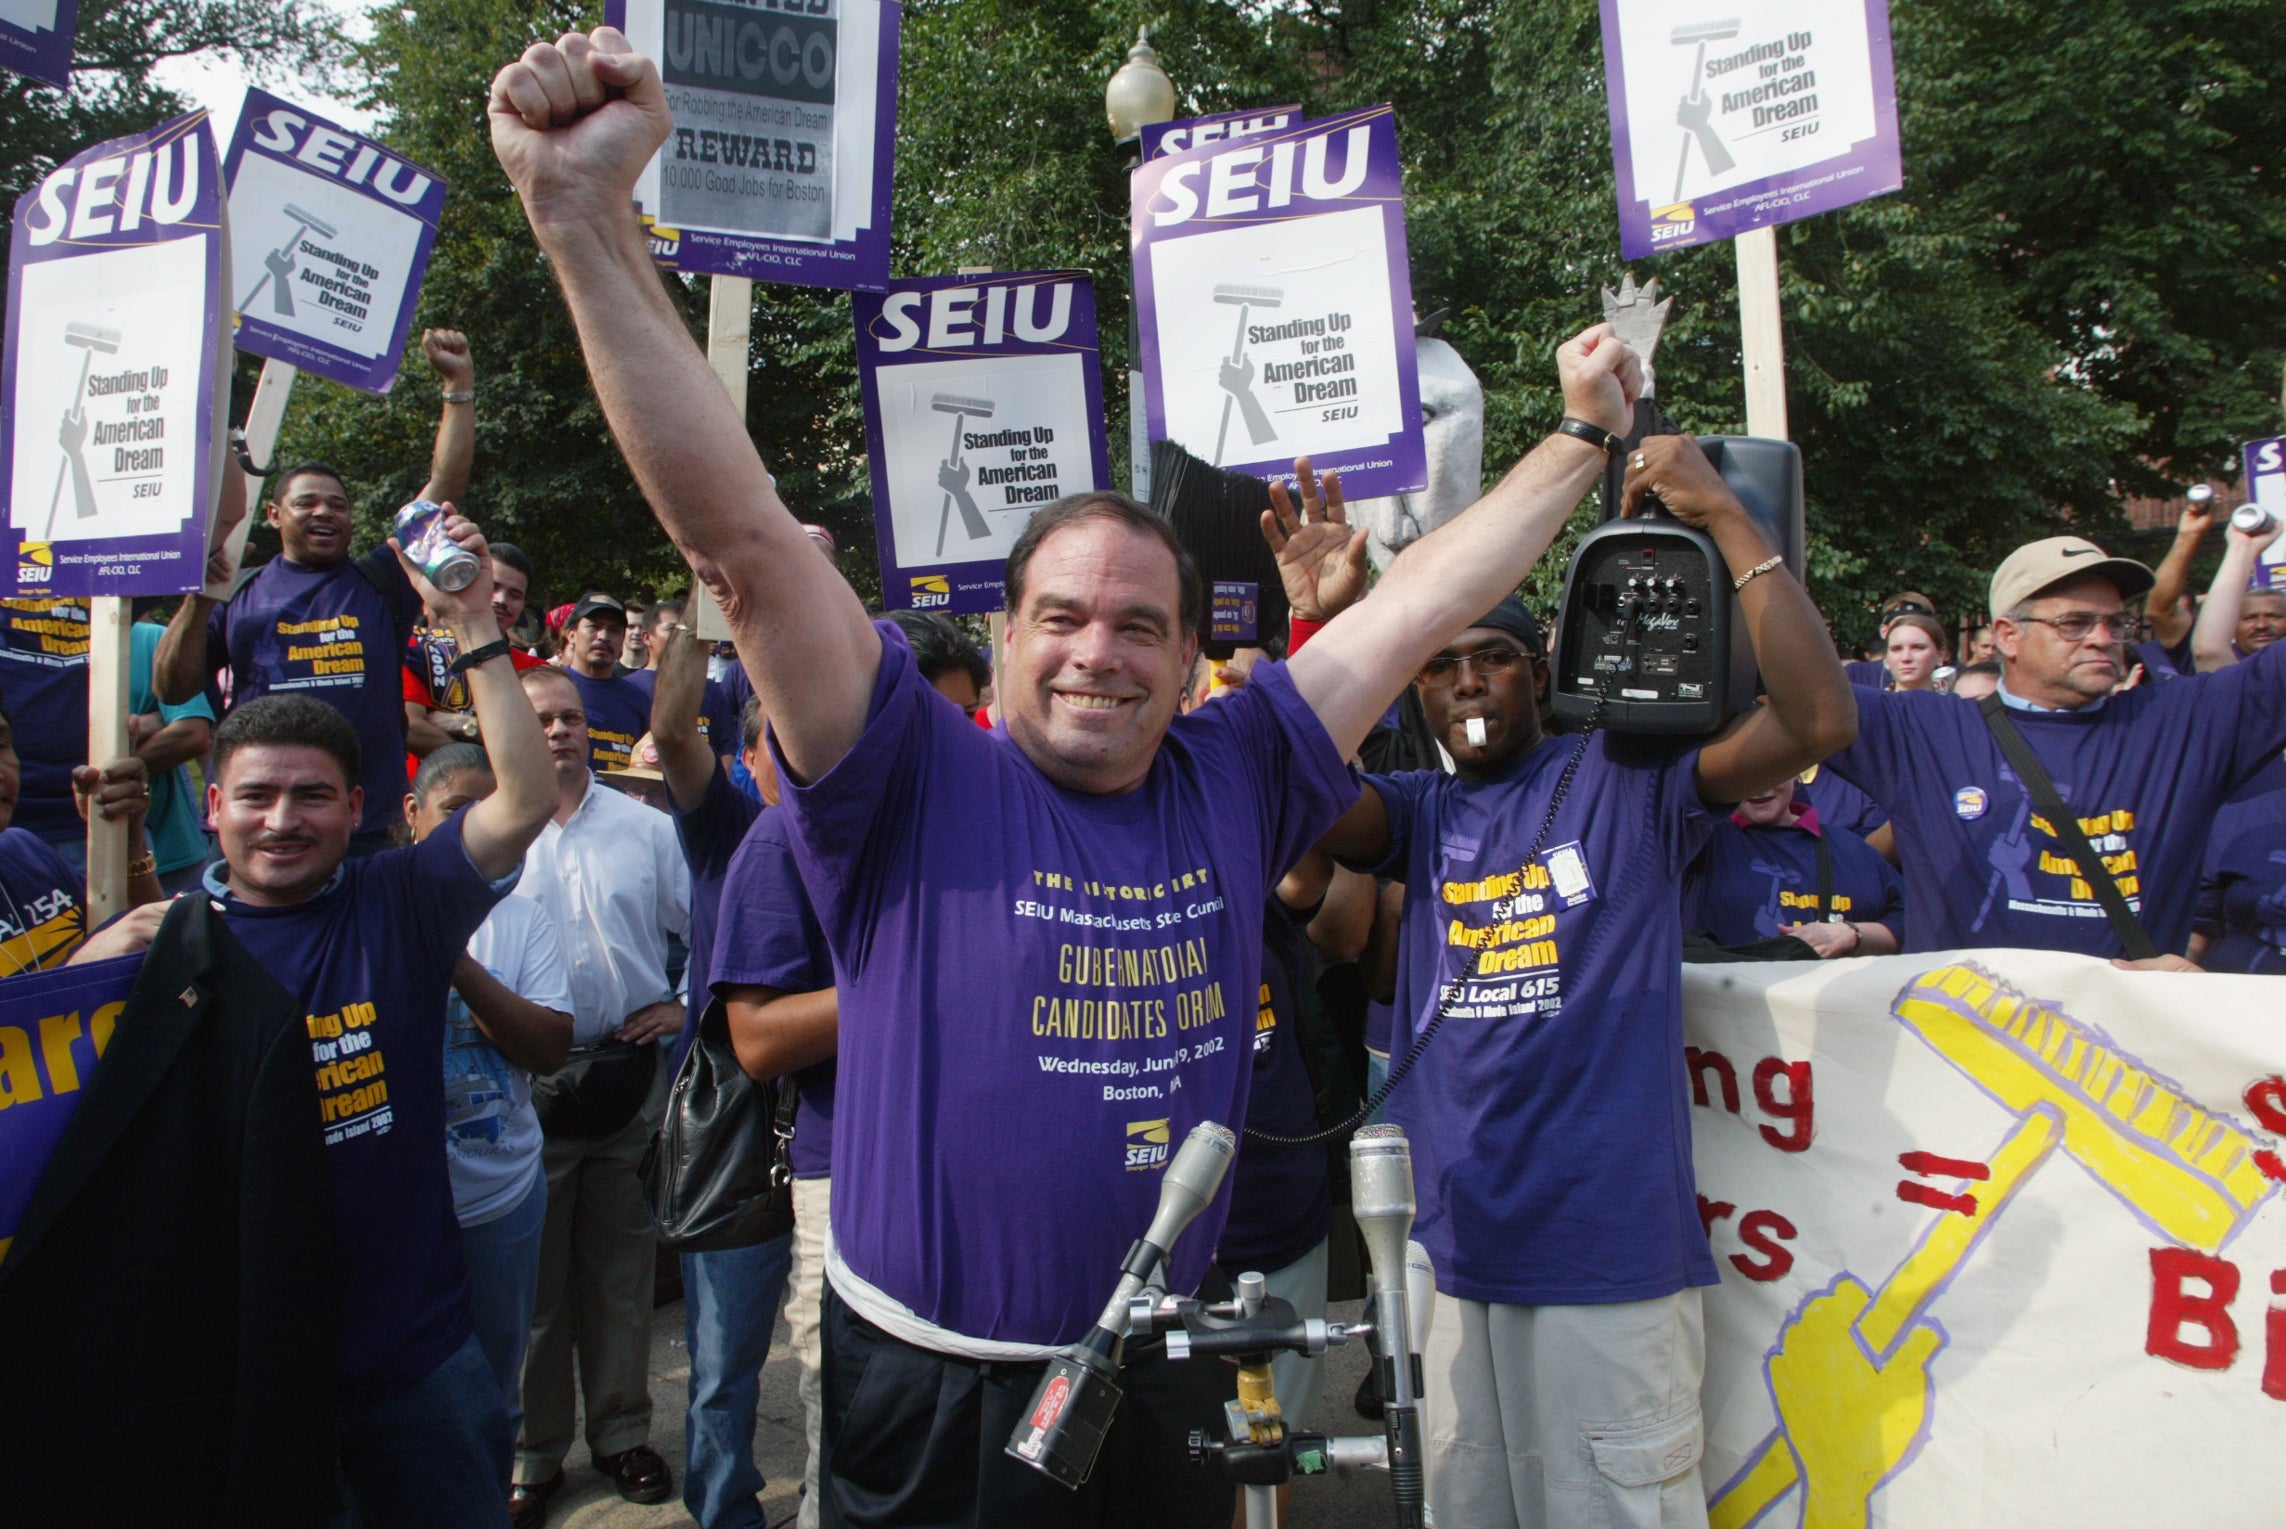 alt = Senate President Thomas Birmingham, wearing a purple SEIU t-shirt, lifts his arms in the air at a rally in support of janitors at the Park Street T stop on the Boston Common.